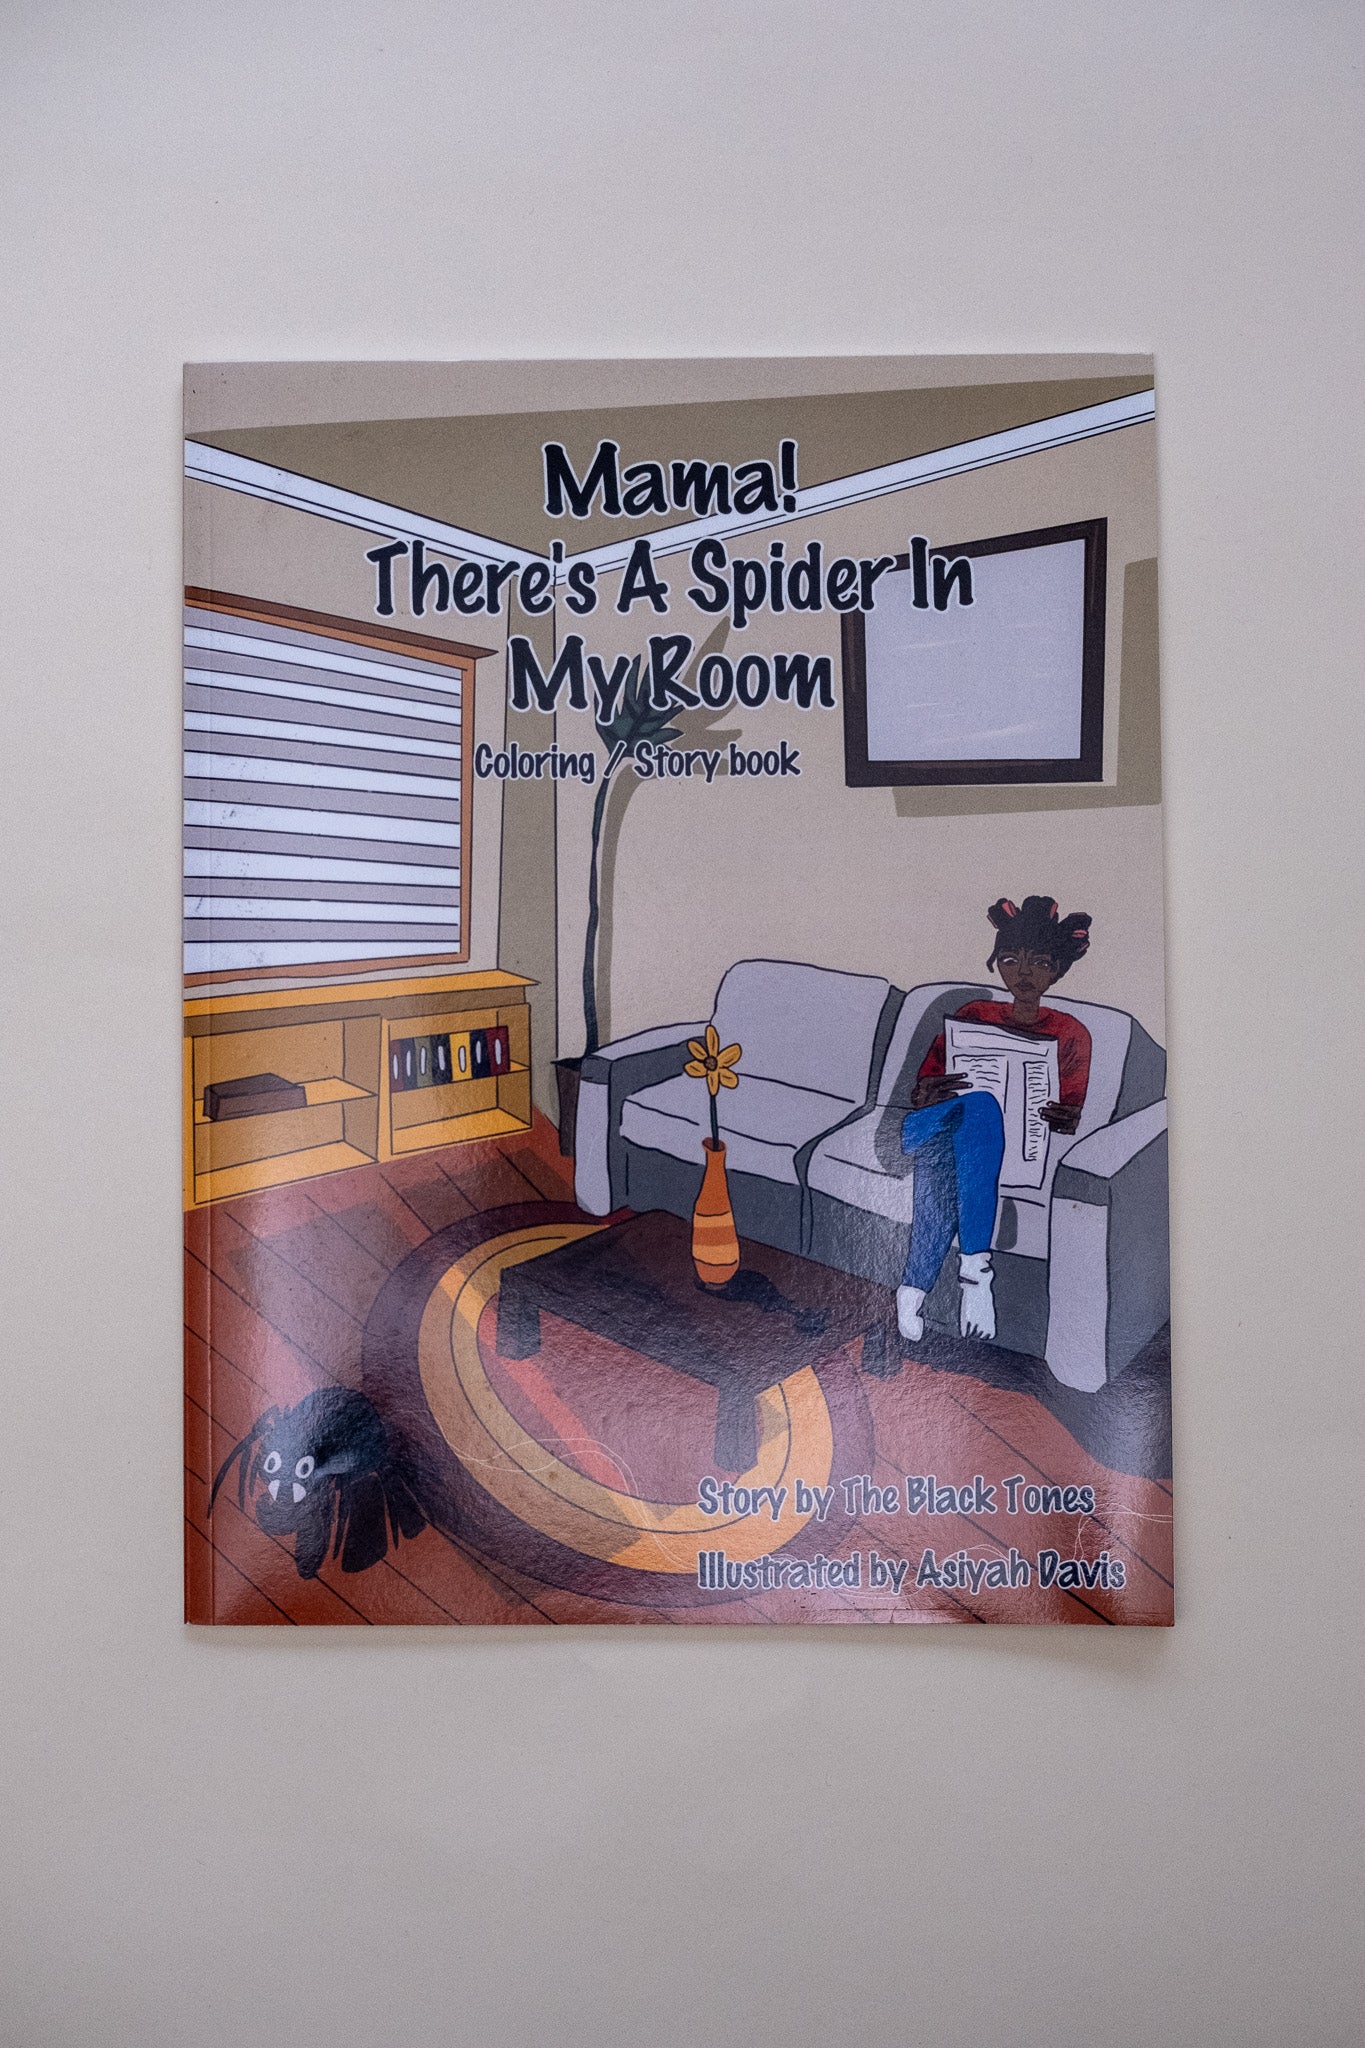 COLORING BOOK - MAMA! THERE'S A SPIDER IN MY ROOM (This item can still be purchased through Amazon. Click image for link).